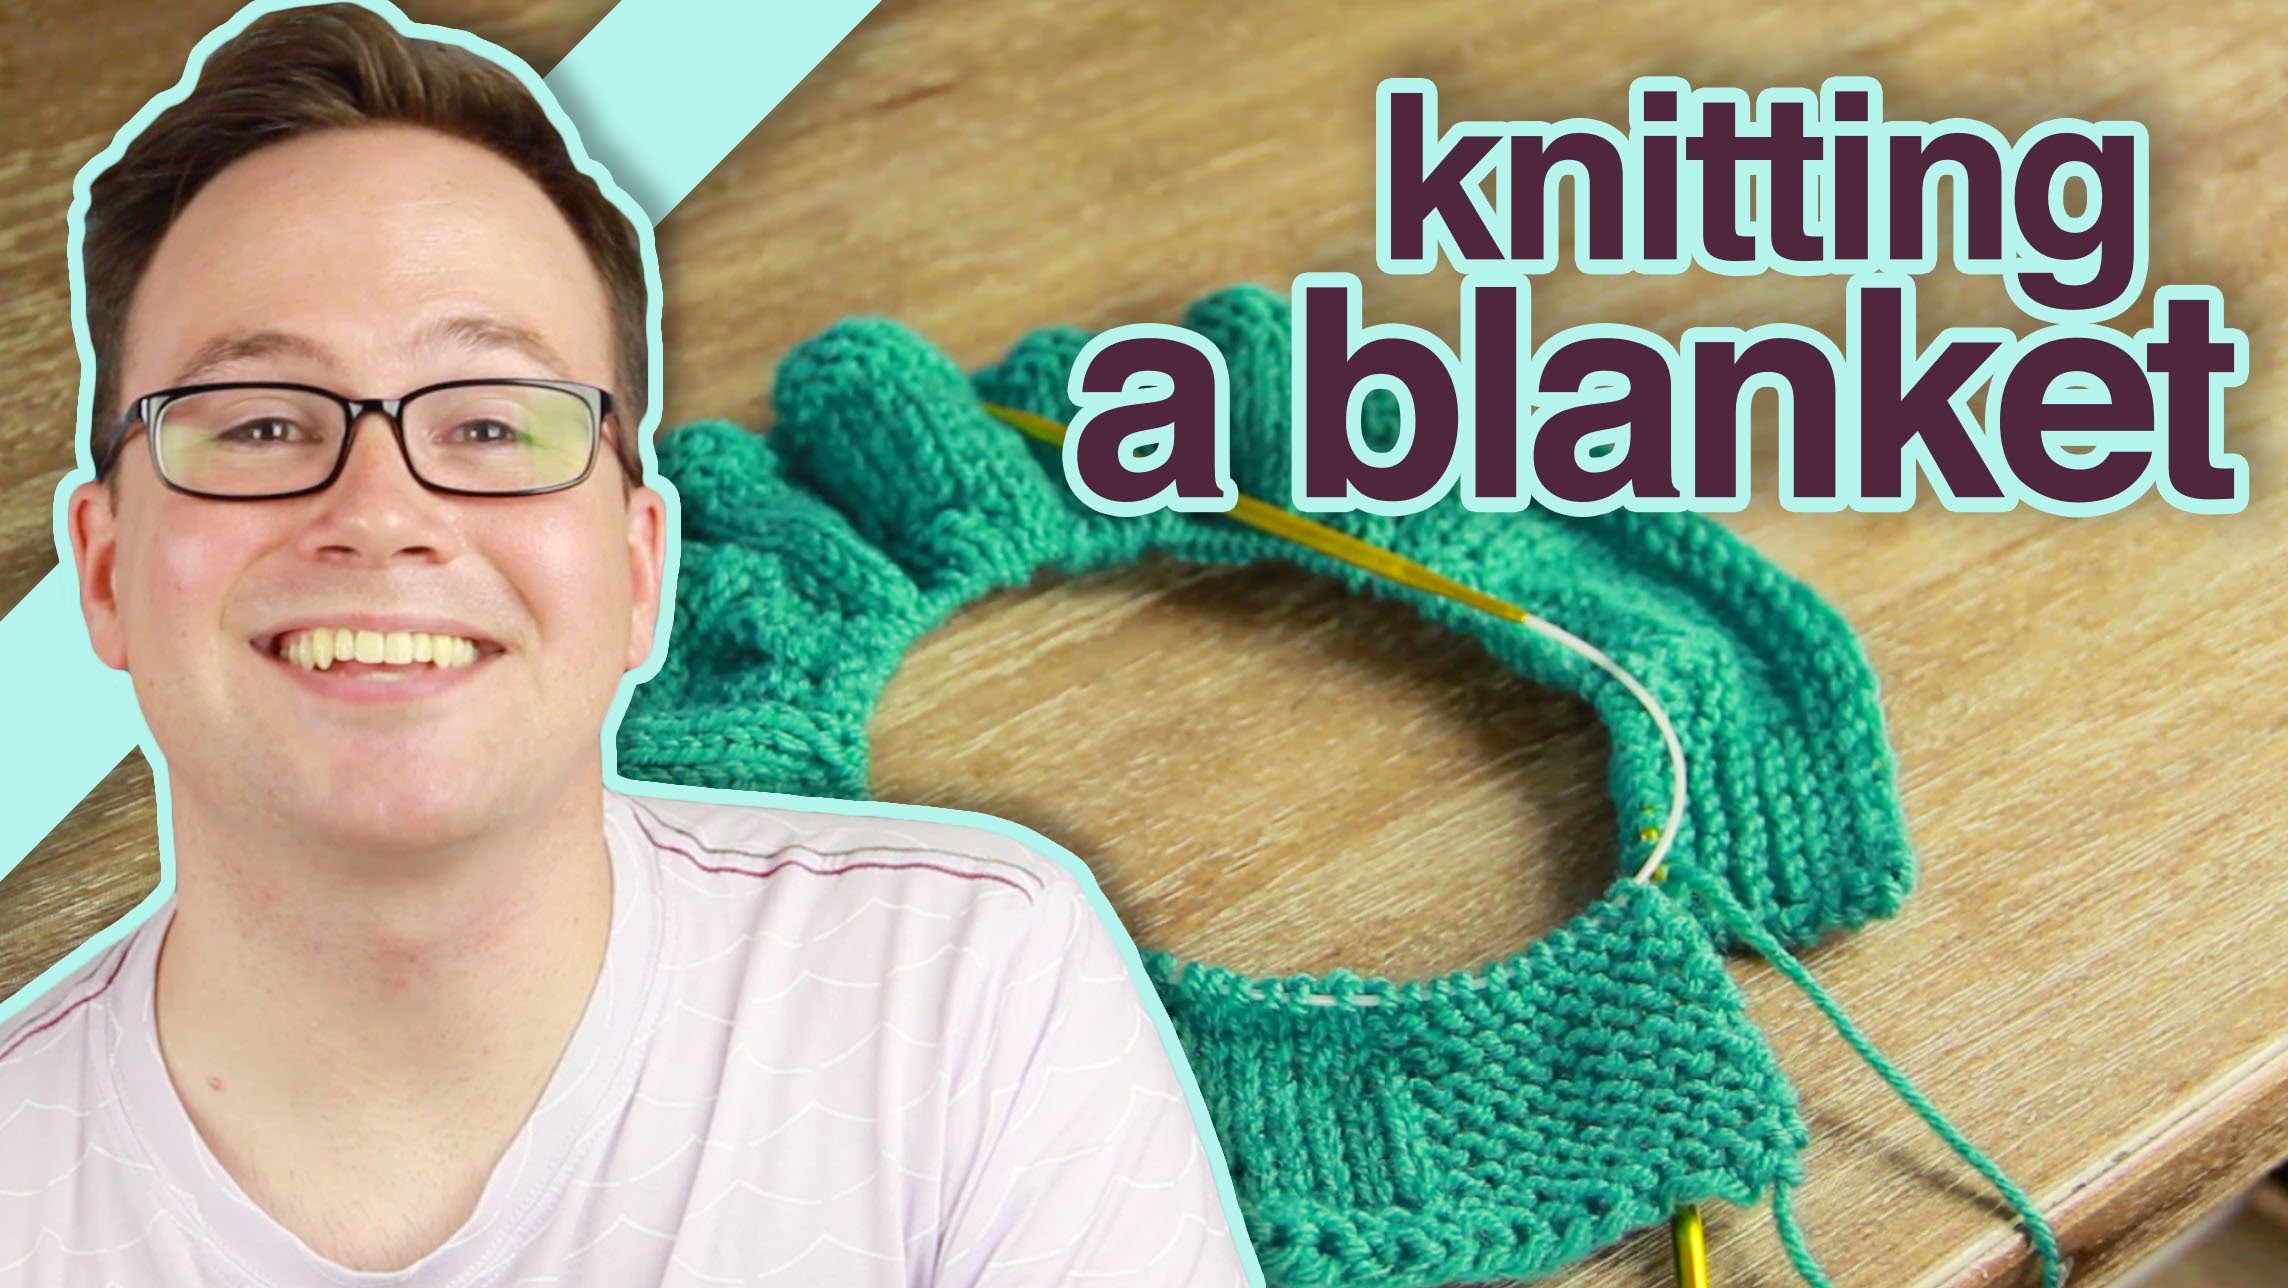 How to Knit a Blanket With Circular Knitting Needles